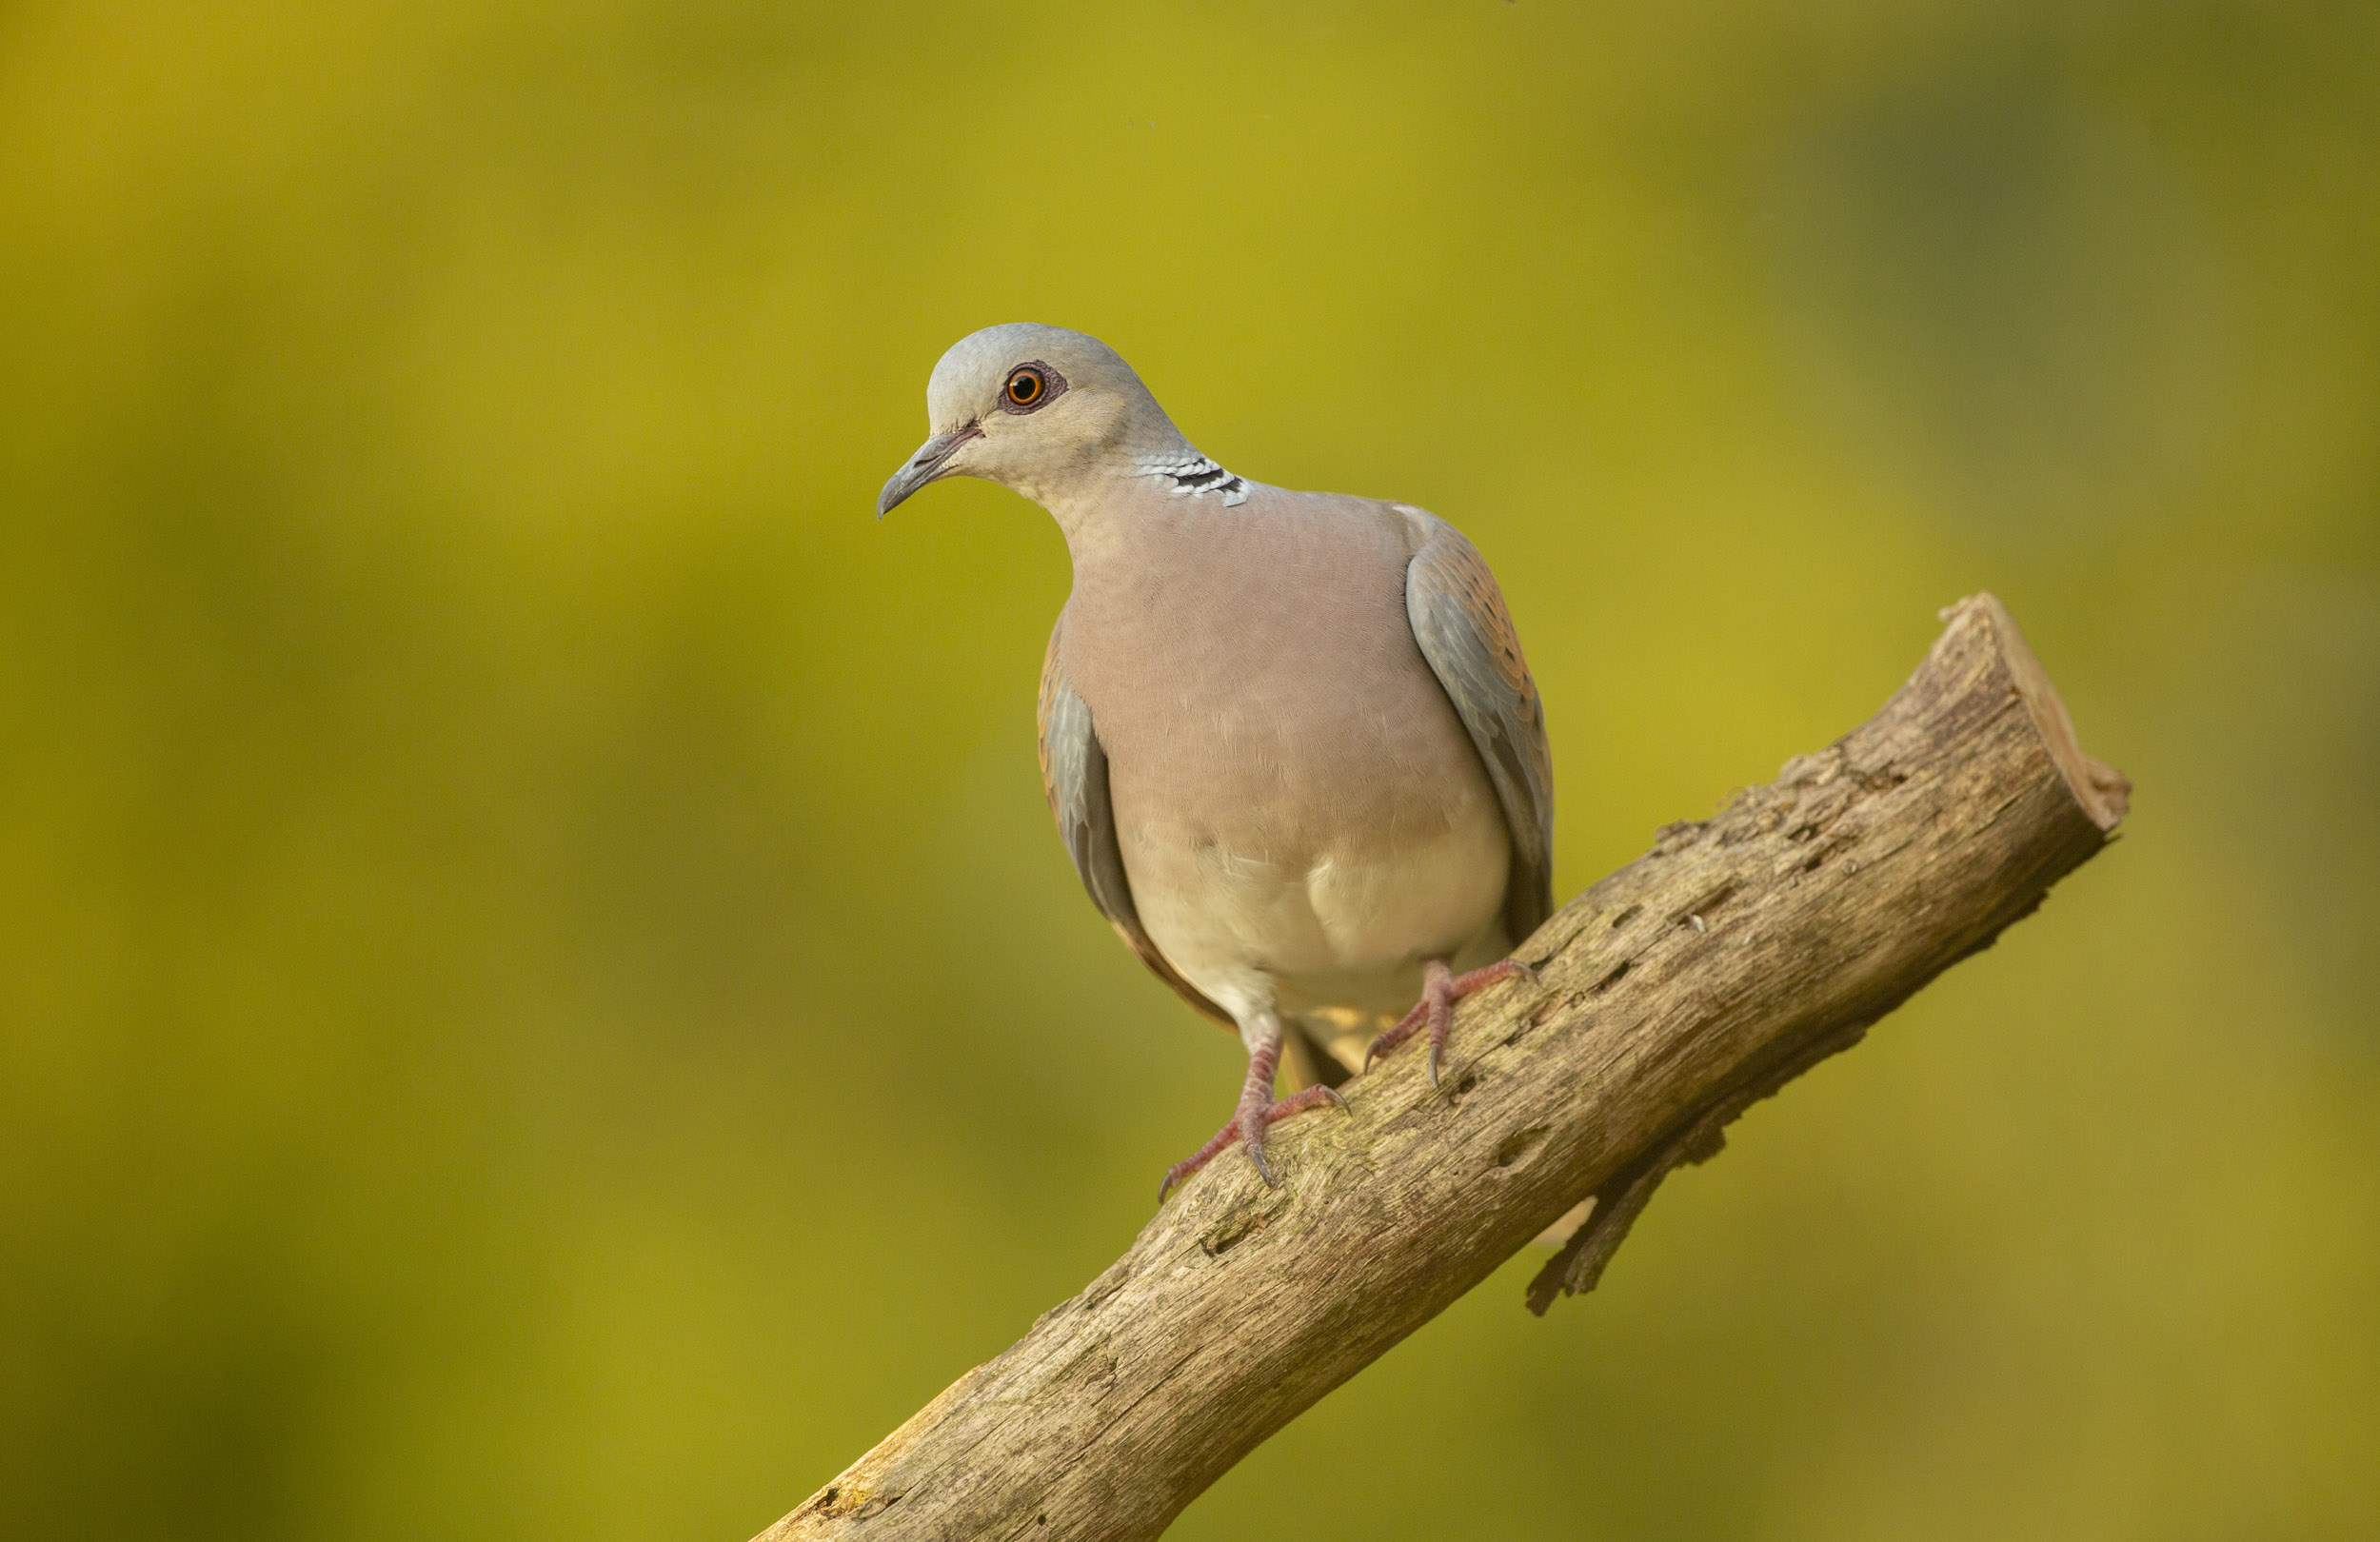 A lone Turtle Dove perched on a branch against a blurred forest background.